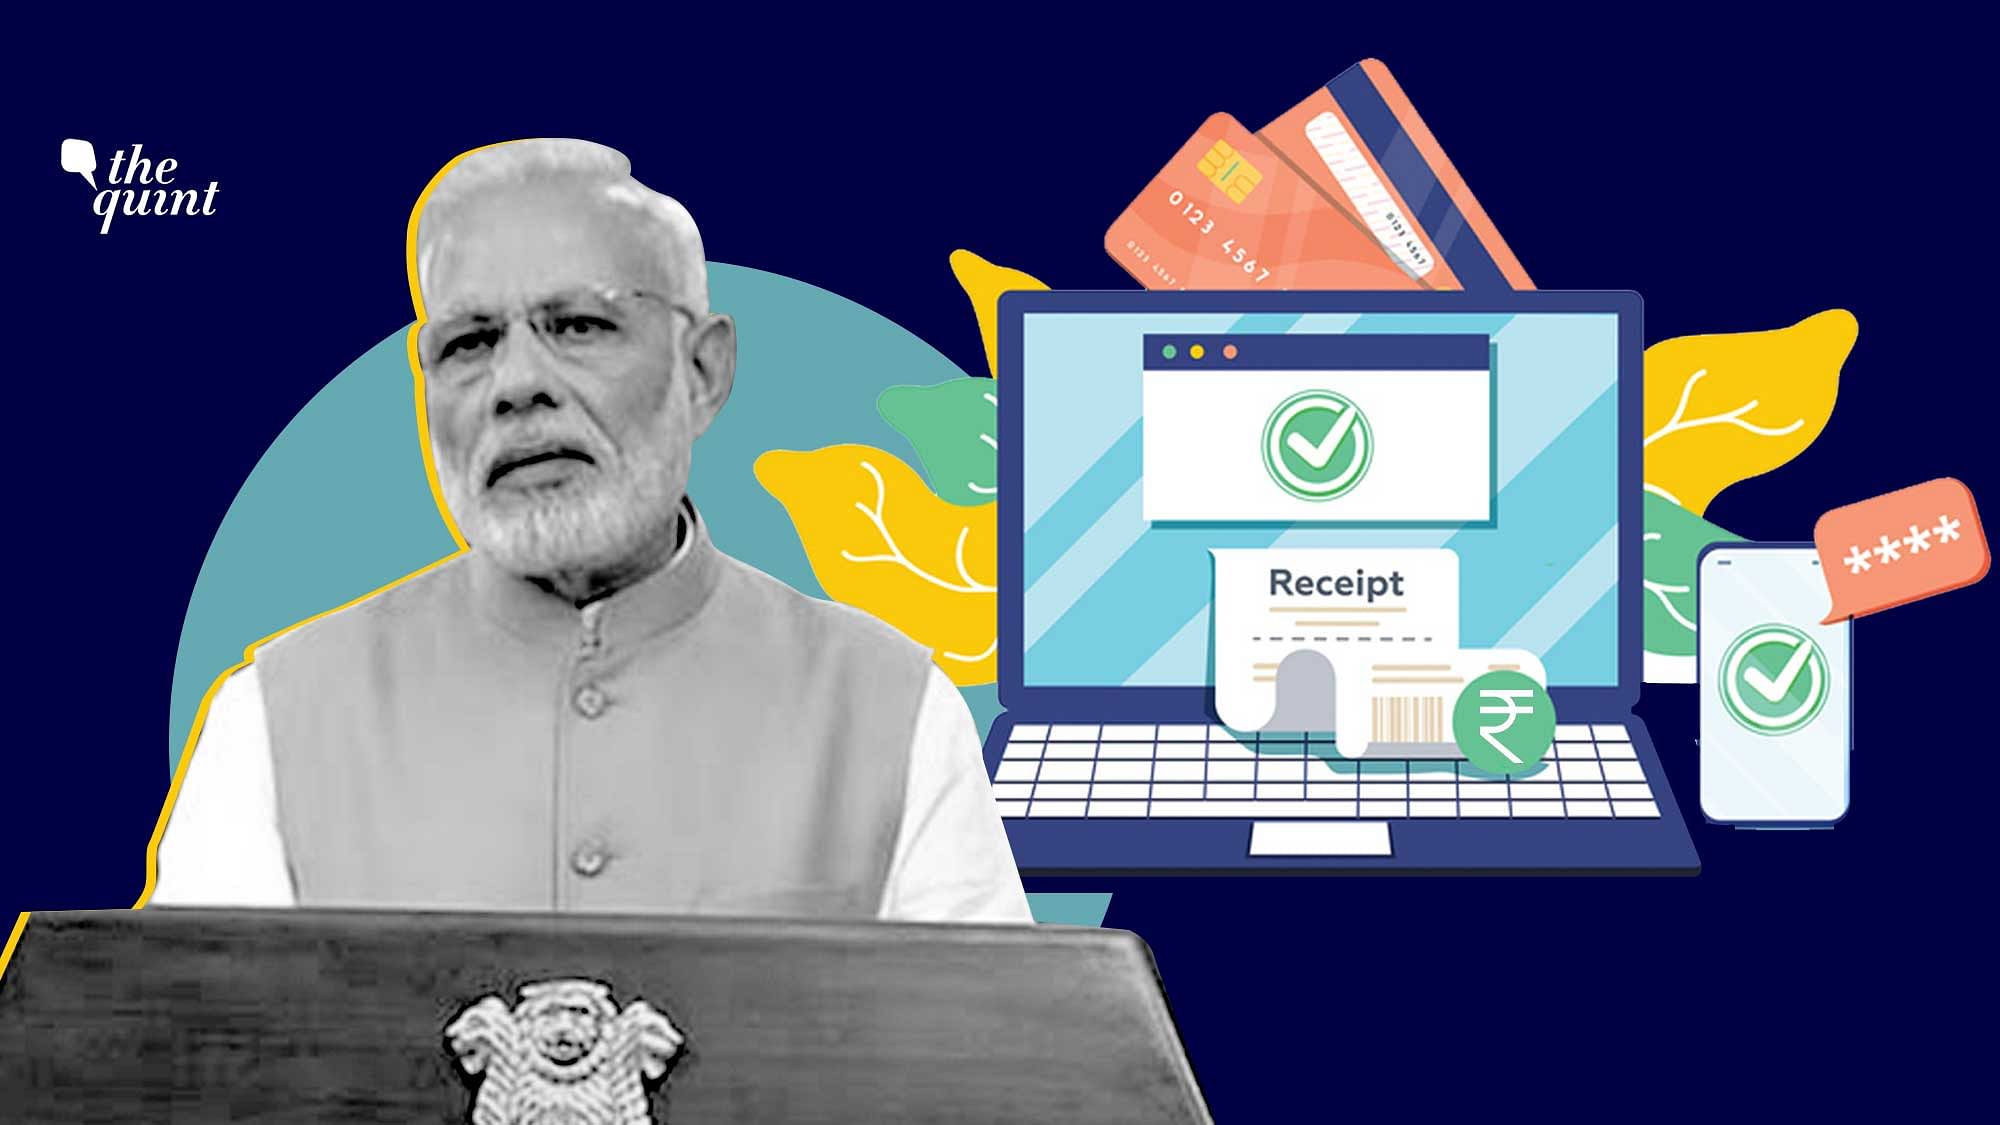 The digital payments industry appears to be pushing the #IndiaPaySafe hashtag aggressively on a day Prime Minister Narendra Modi is scheduled to deliver an address to the nation at 8 pm. 